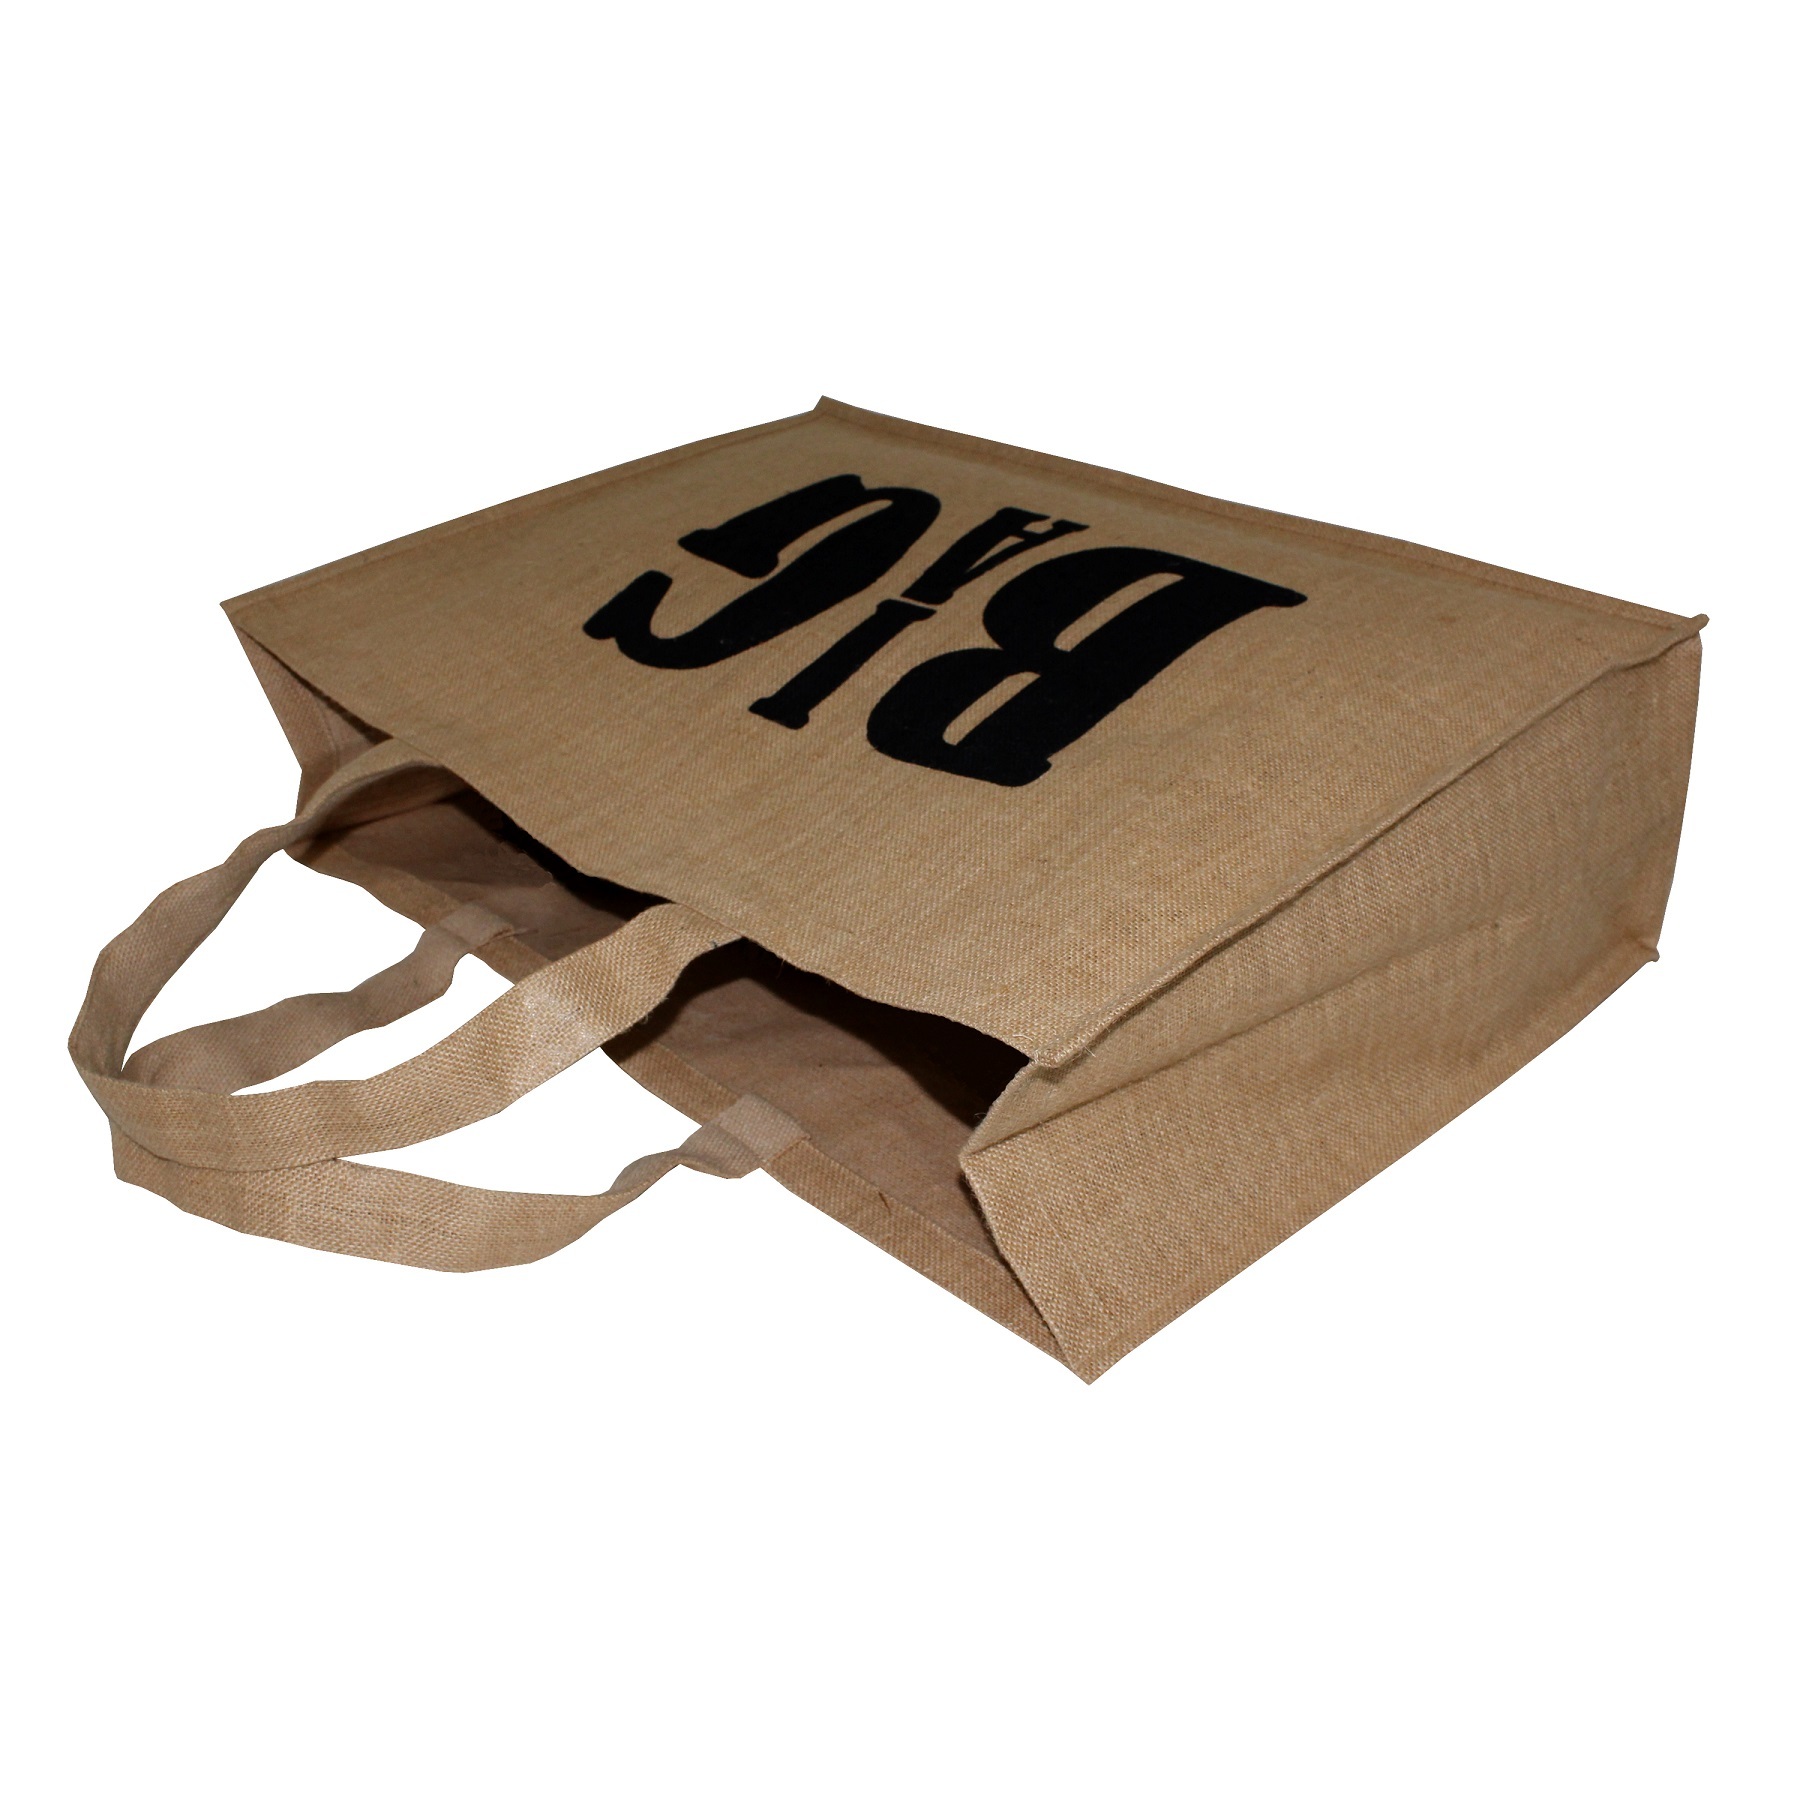 PP Laminated Jute Shopping Bag With Cotton Web Handle